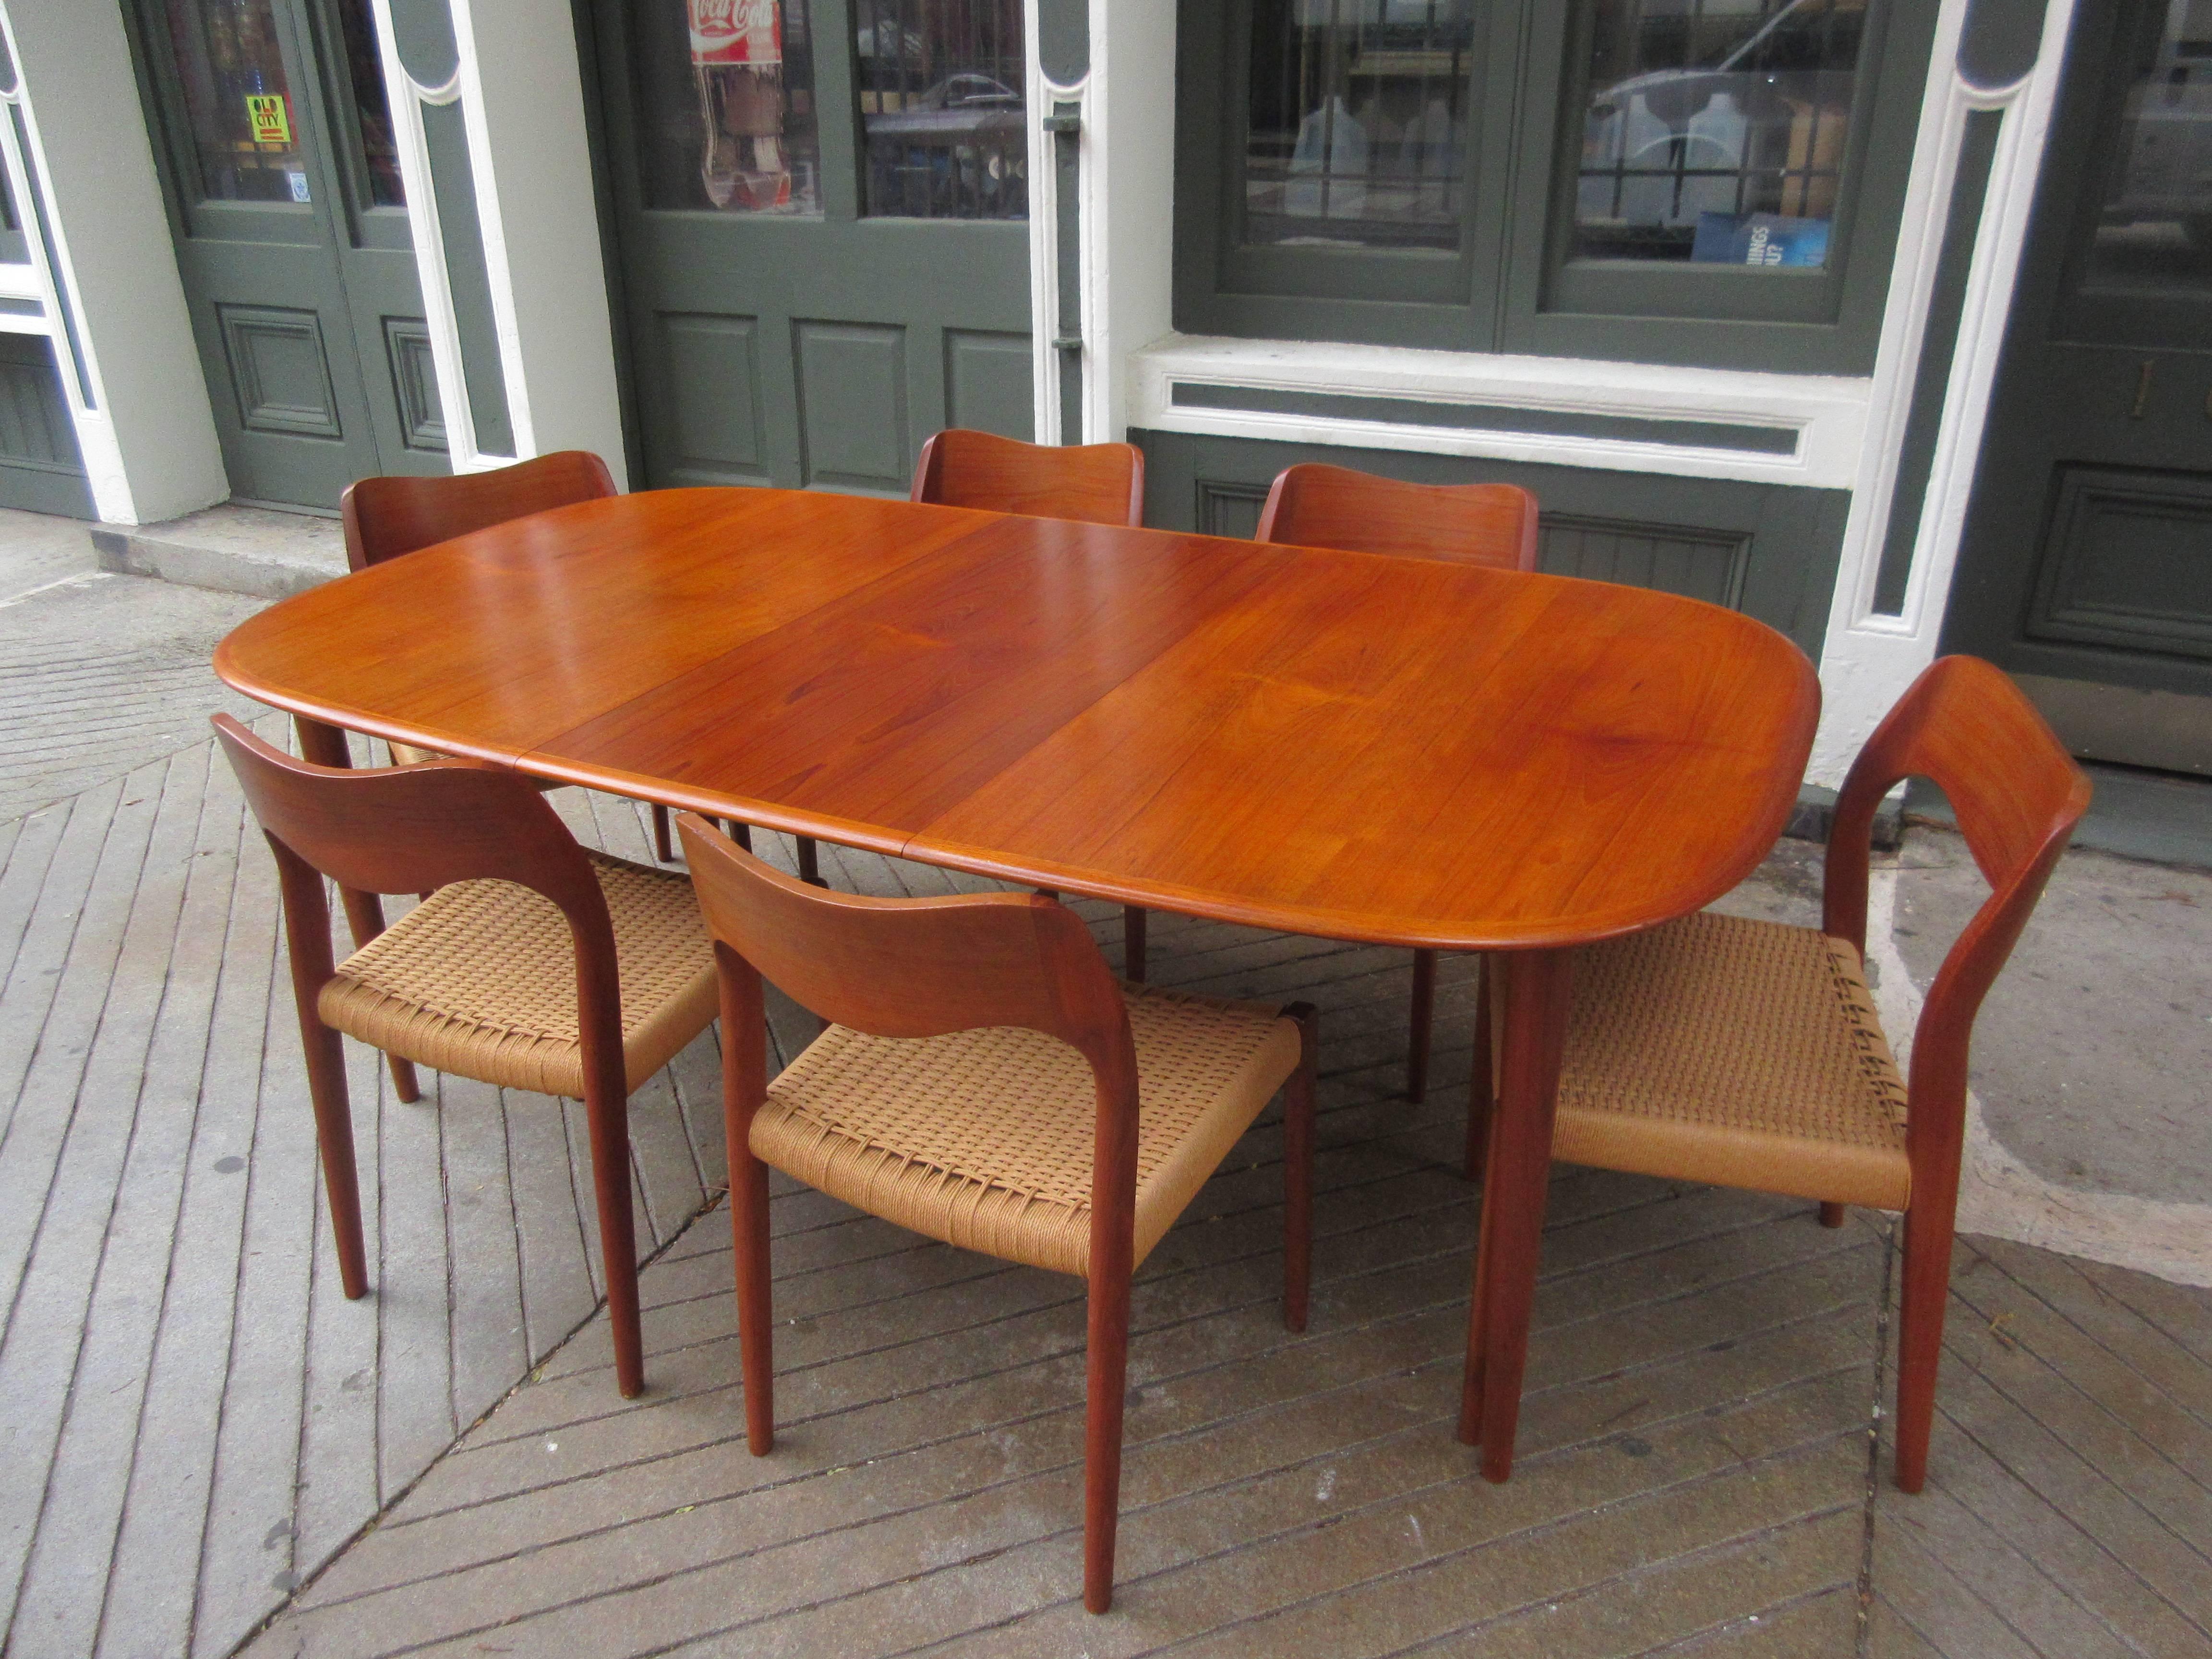 Neils Moeller Chairs Paired with MM Moreddi Teak Dining Table 3